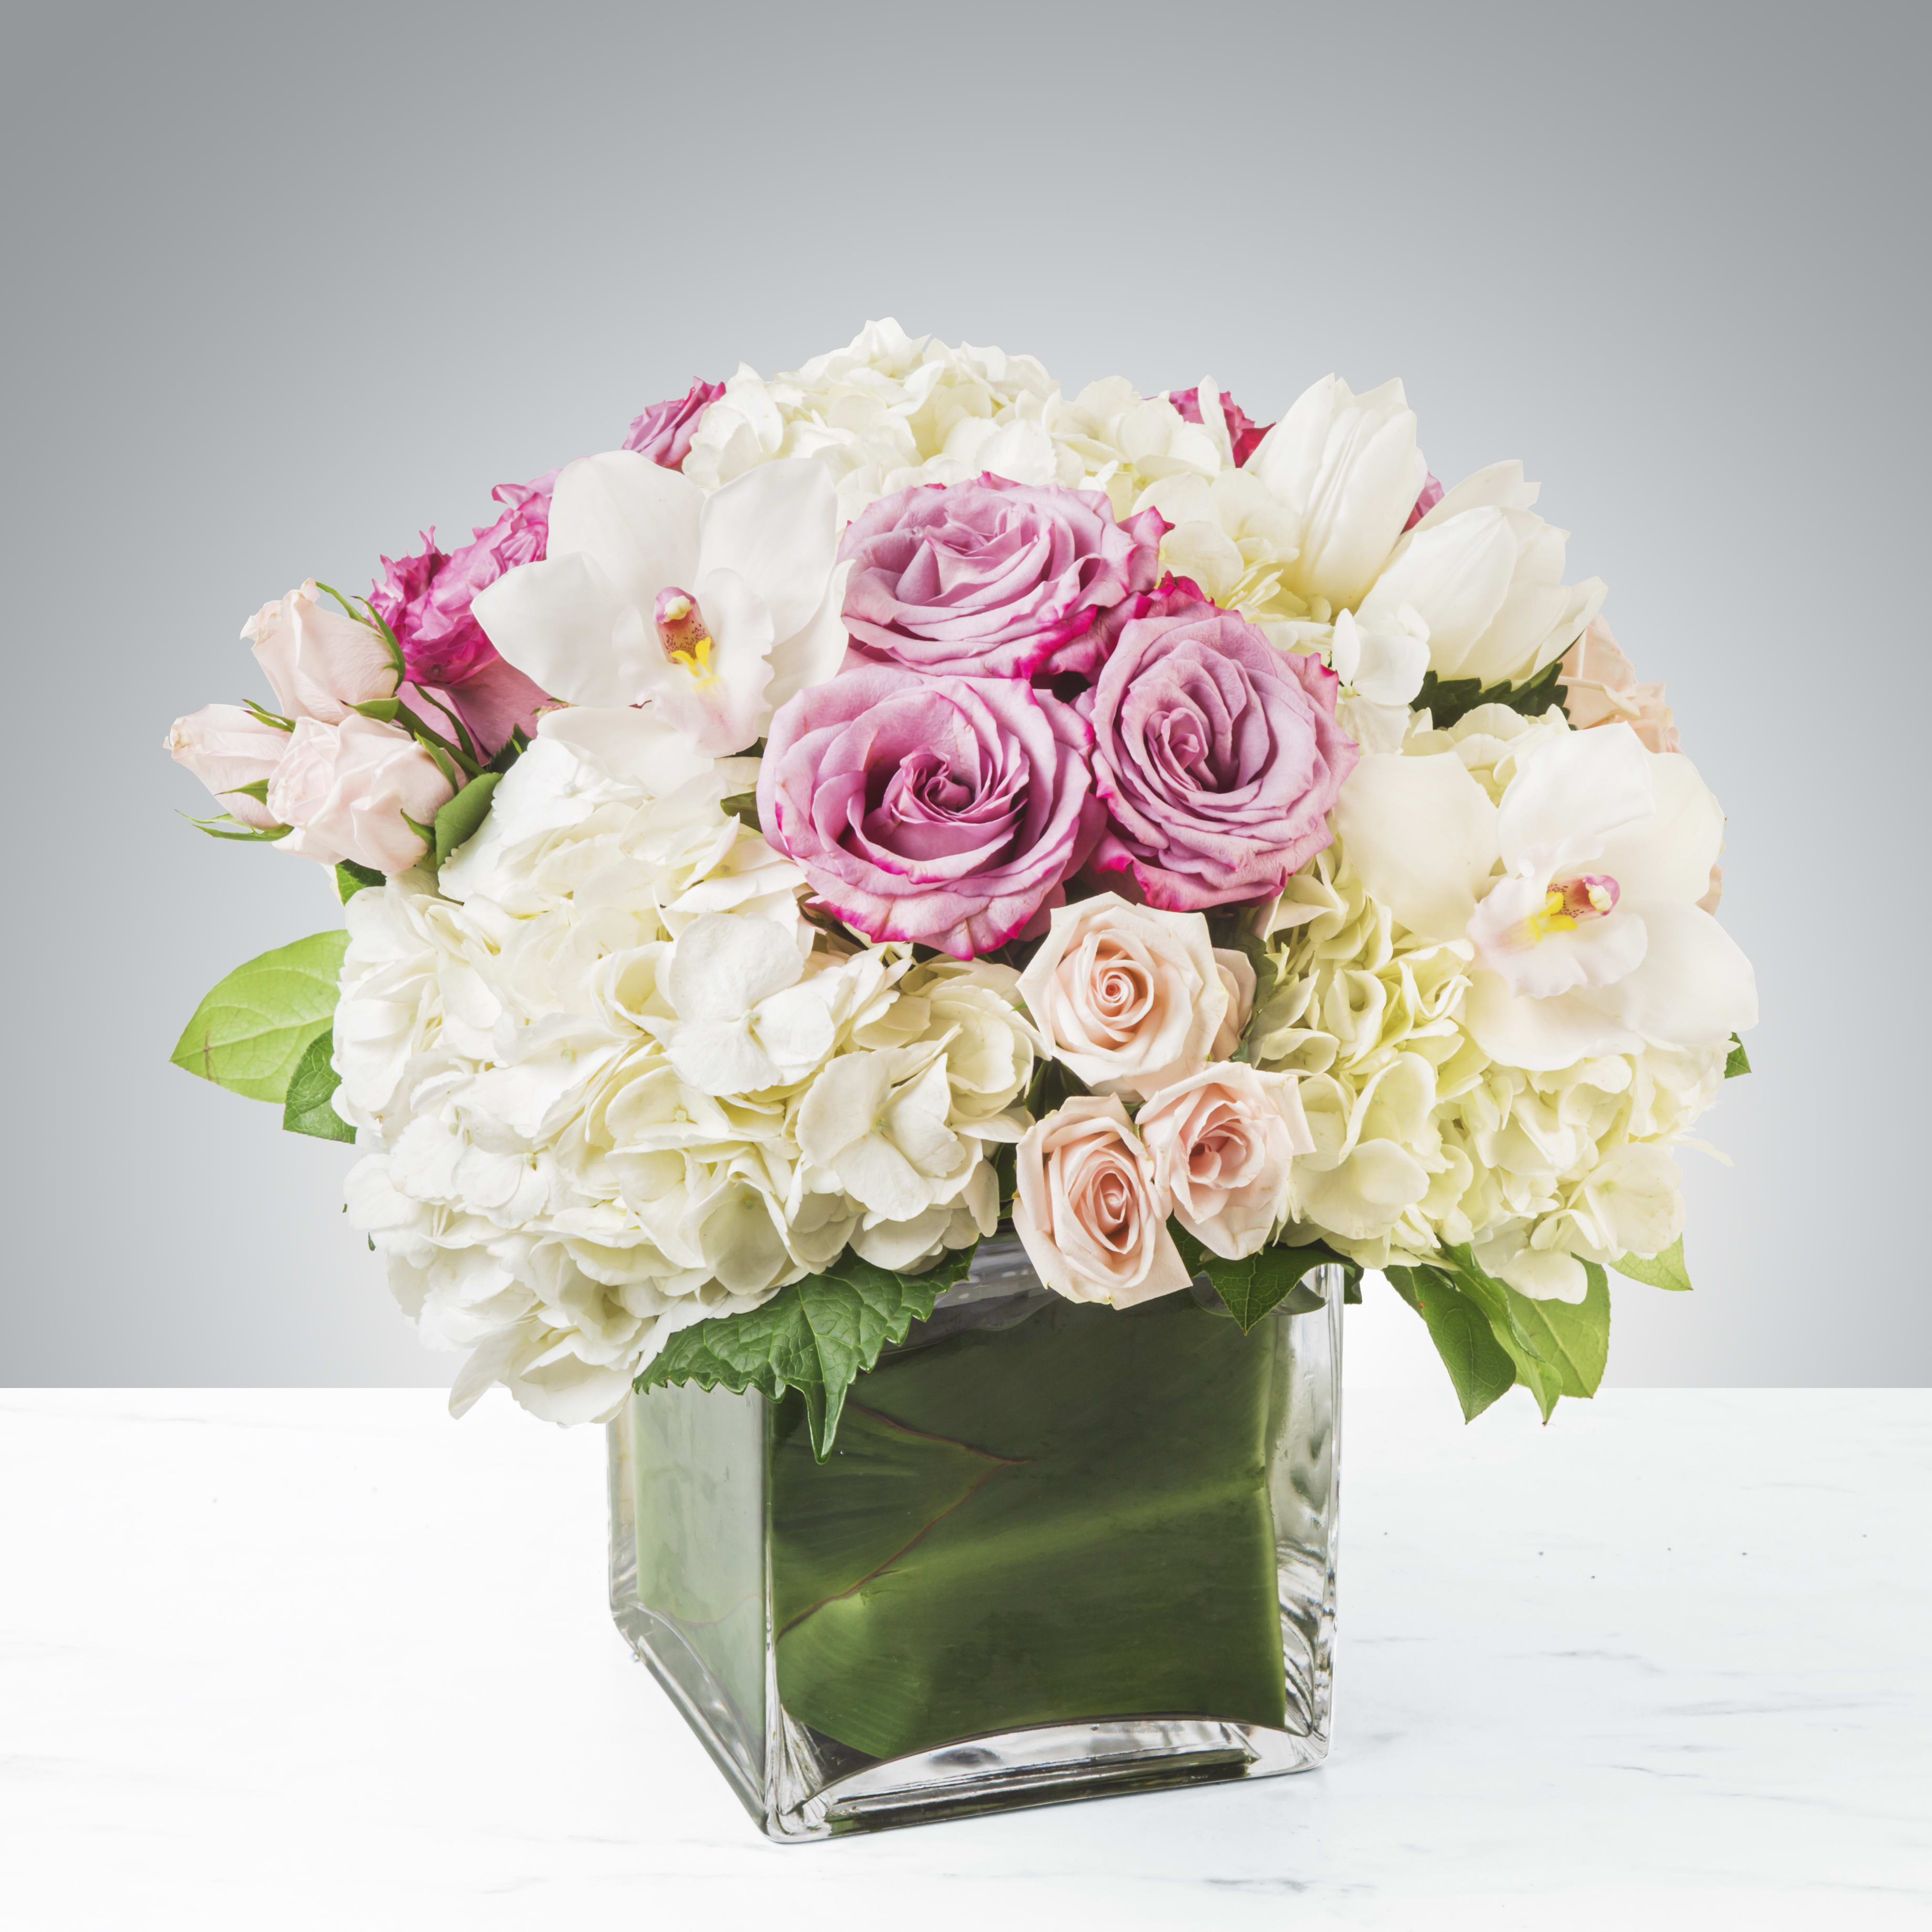 Carolina by BloomNation™ - Classic and Beautiful, this large arrangement whispers luxury. Soft pinks, whites and creams come together to create an appealingly feminine gift. Perfect for welcoming a new baby, wishing happy birthday or congratulations    